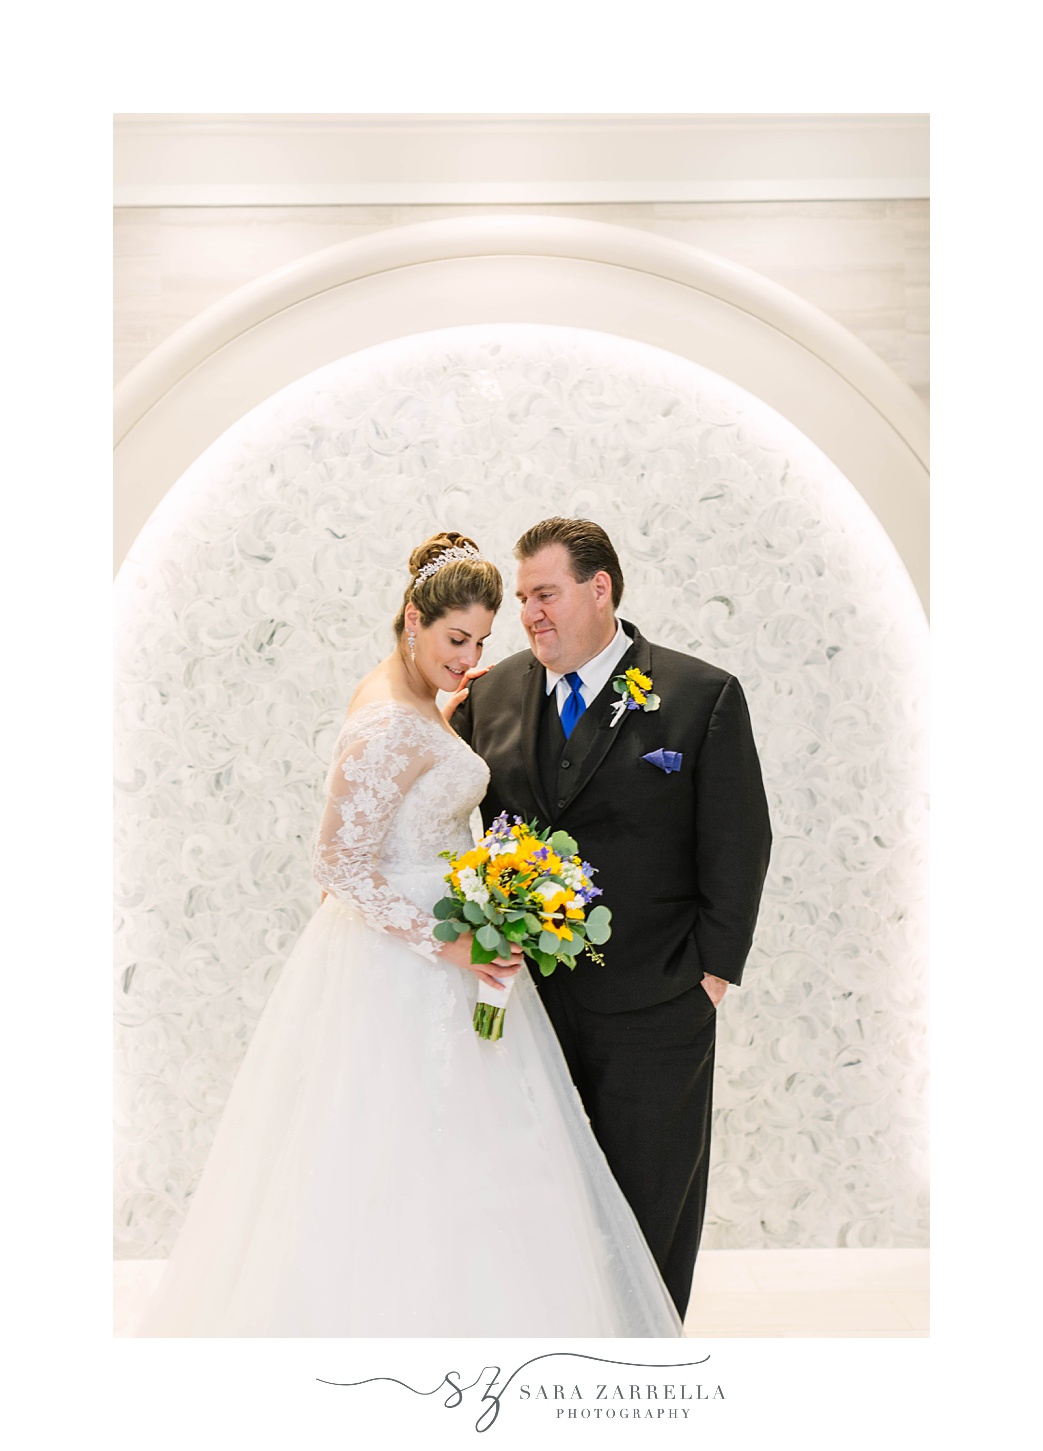 newlyweds pose together in white hallway at Quidnessett Country Club